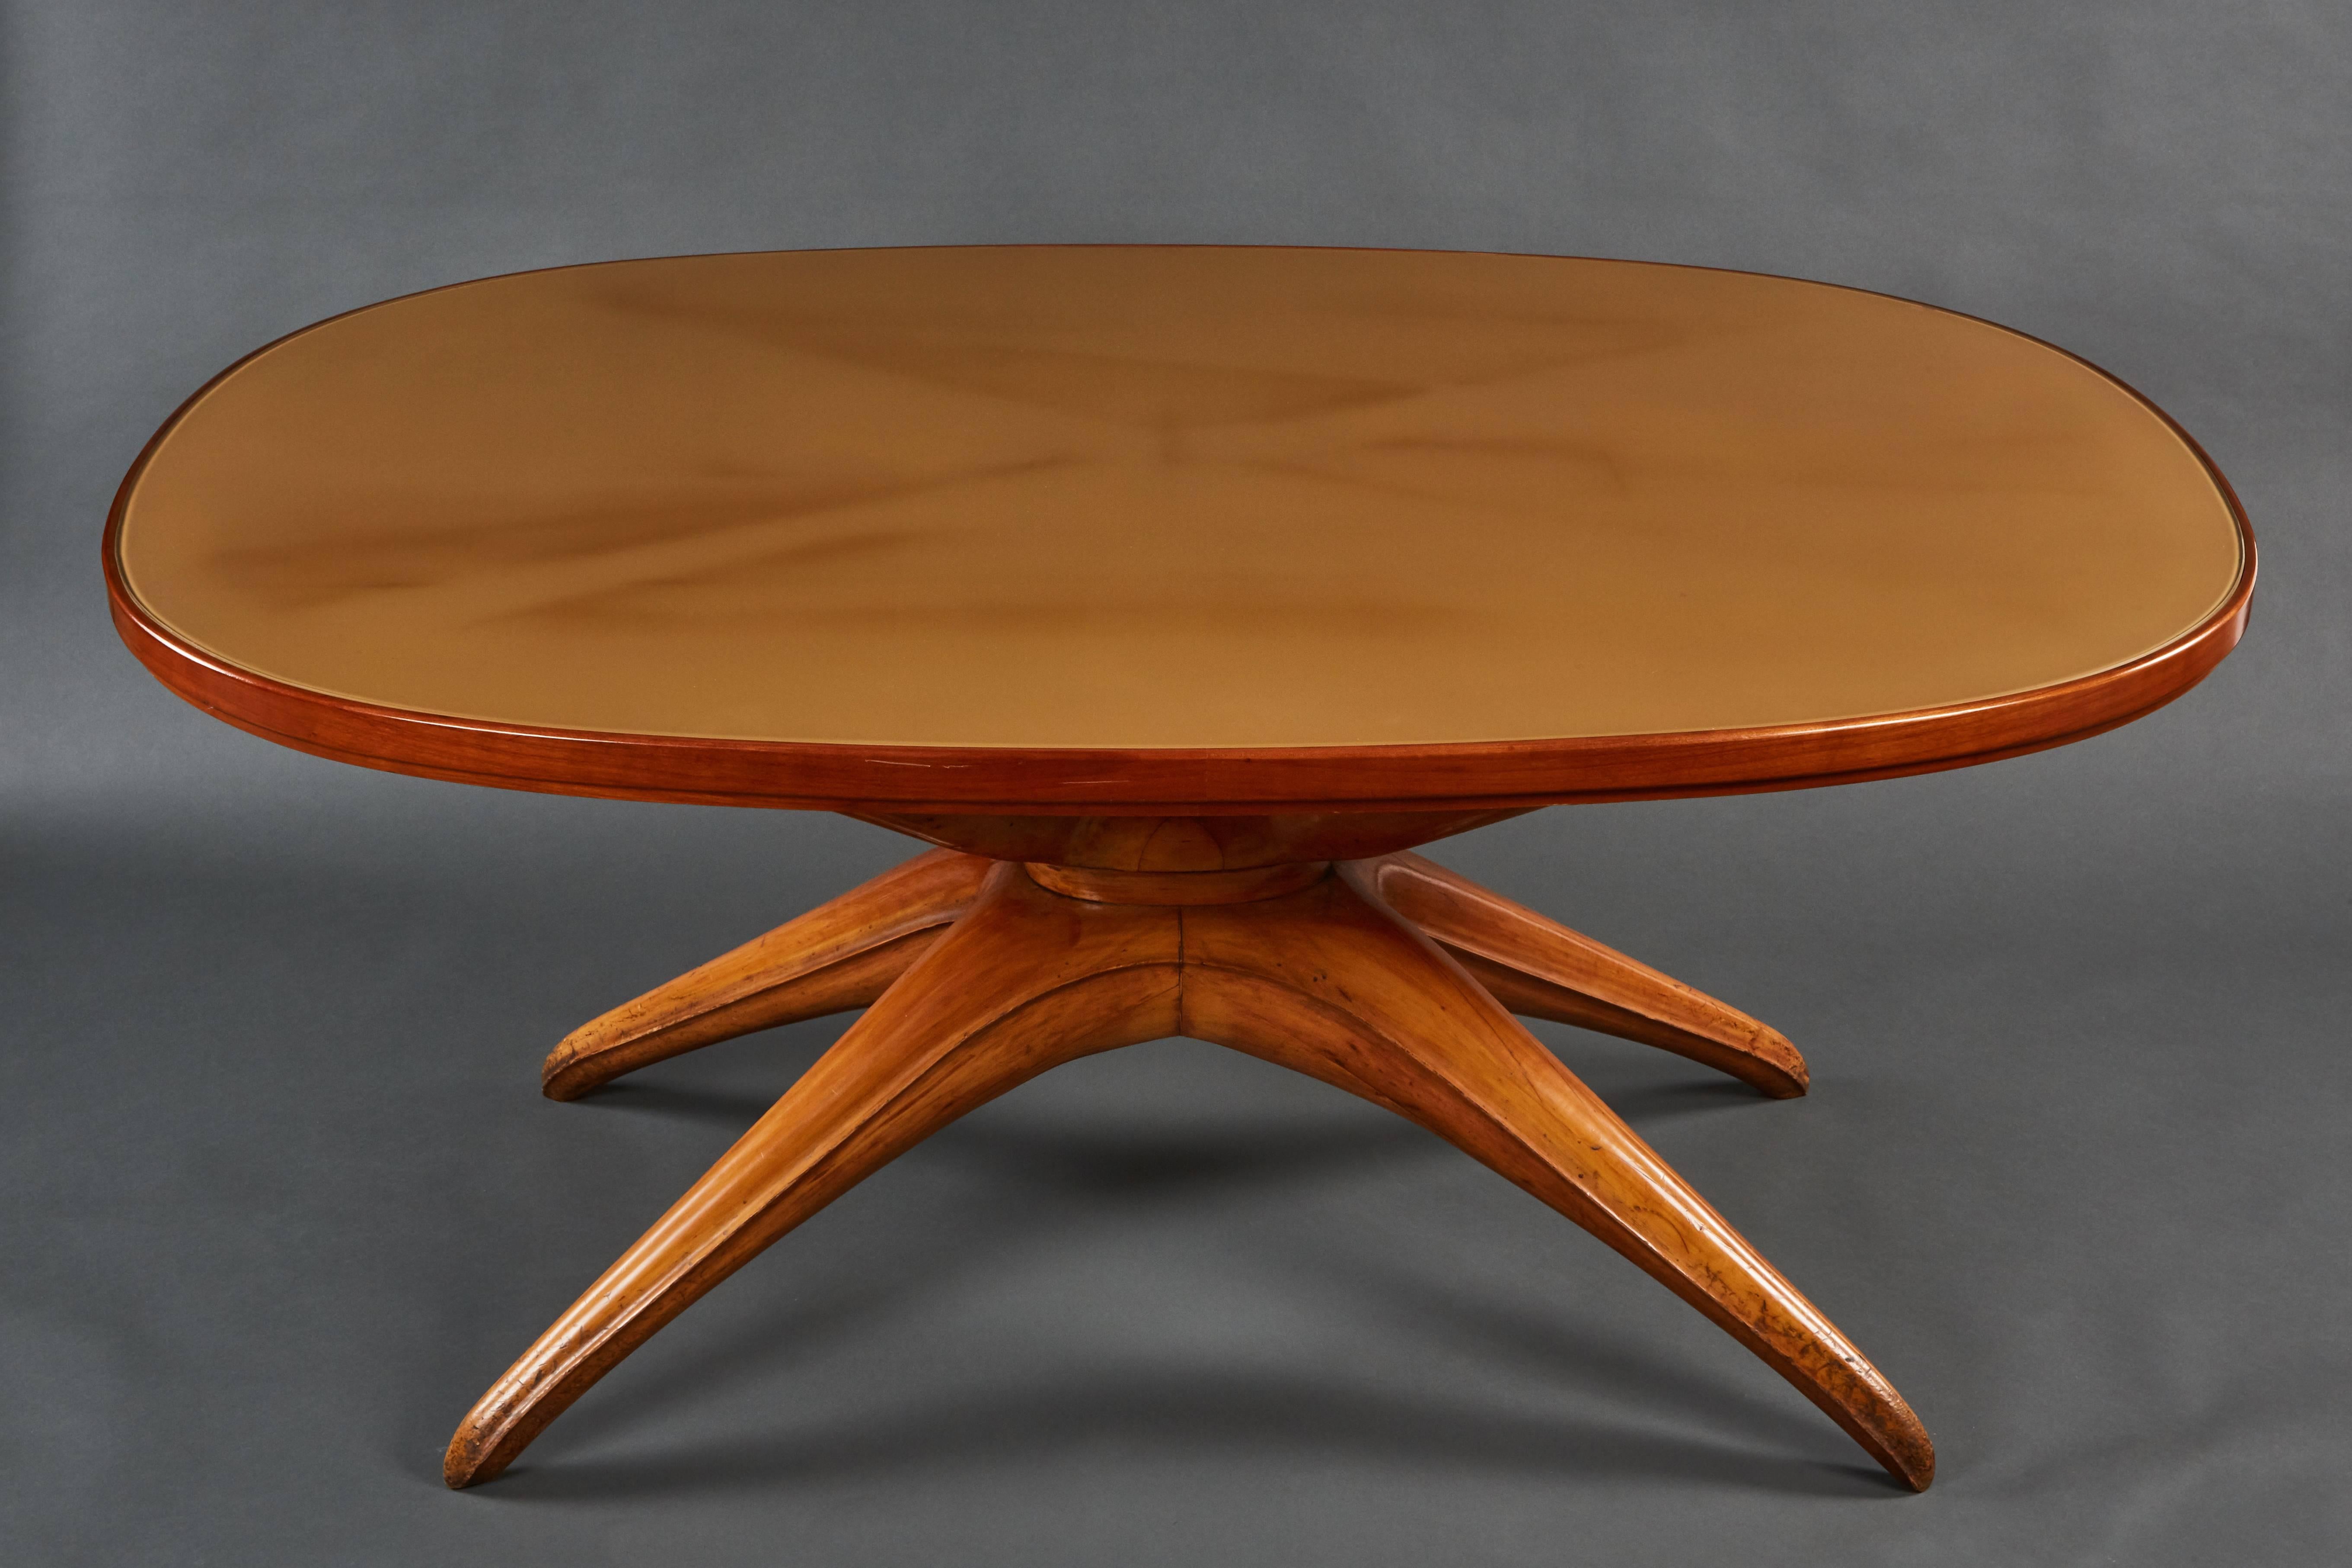 A dramatic oval table attributed to Osvaldo Borsani, featuring a significant sculptural wooden base and gold painted glass top.
 